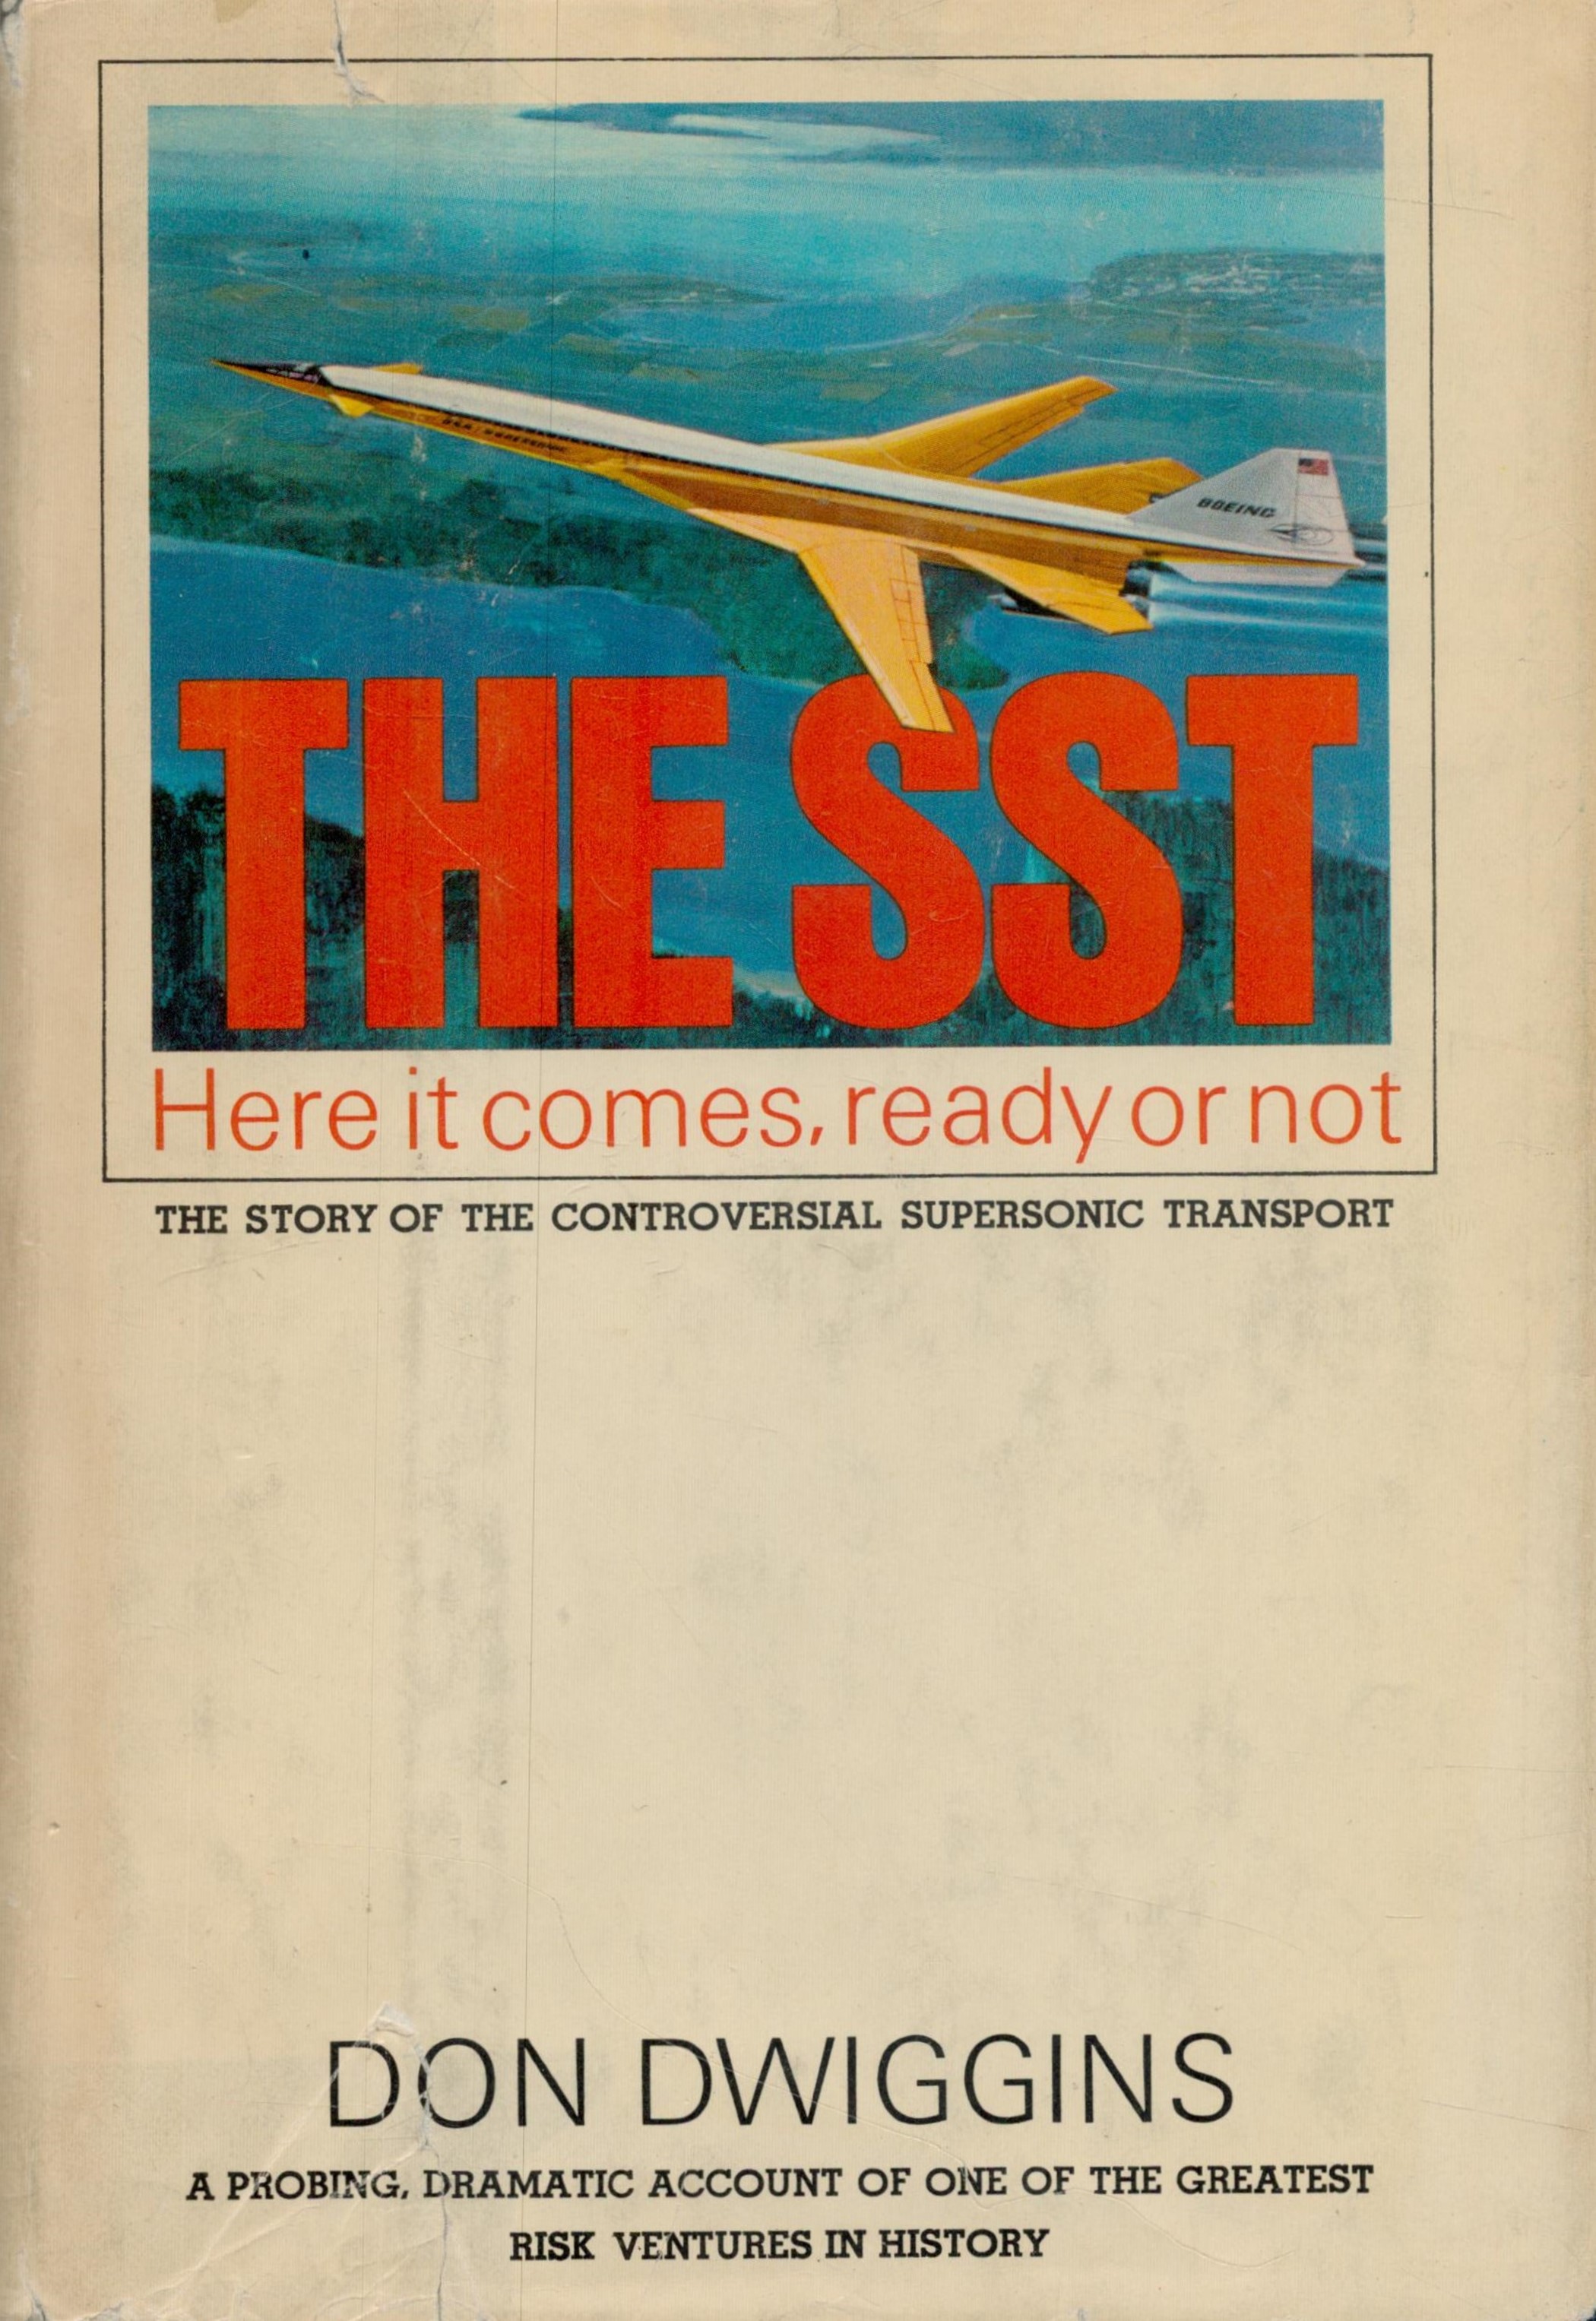 Aviation hardback book titled The SST Here it Comes Ready or Not The Story of the Controversial